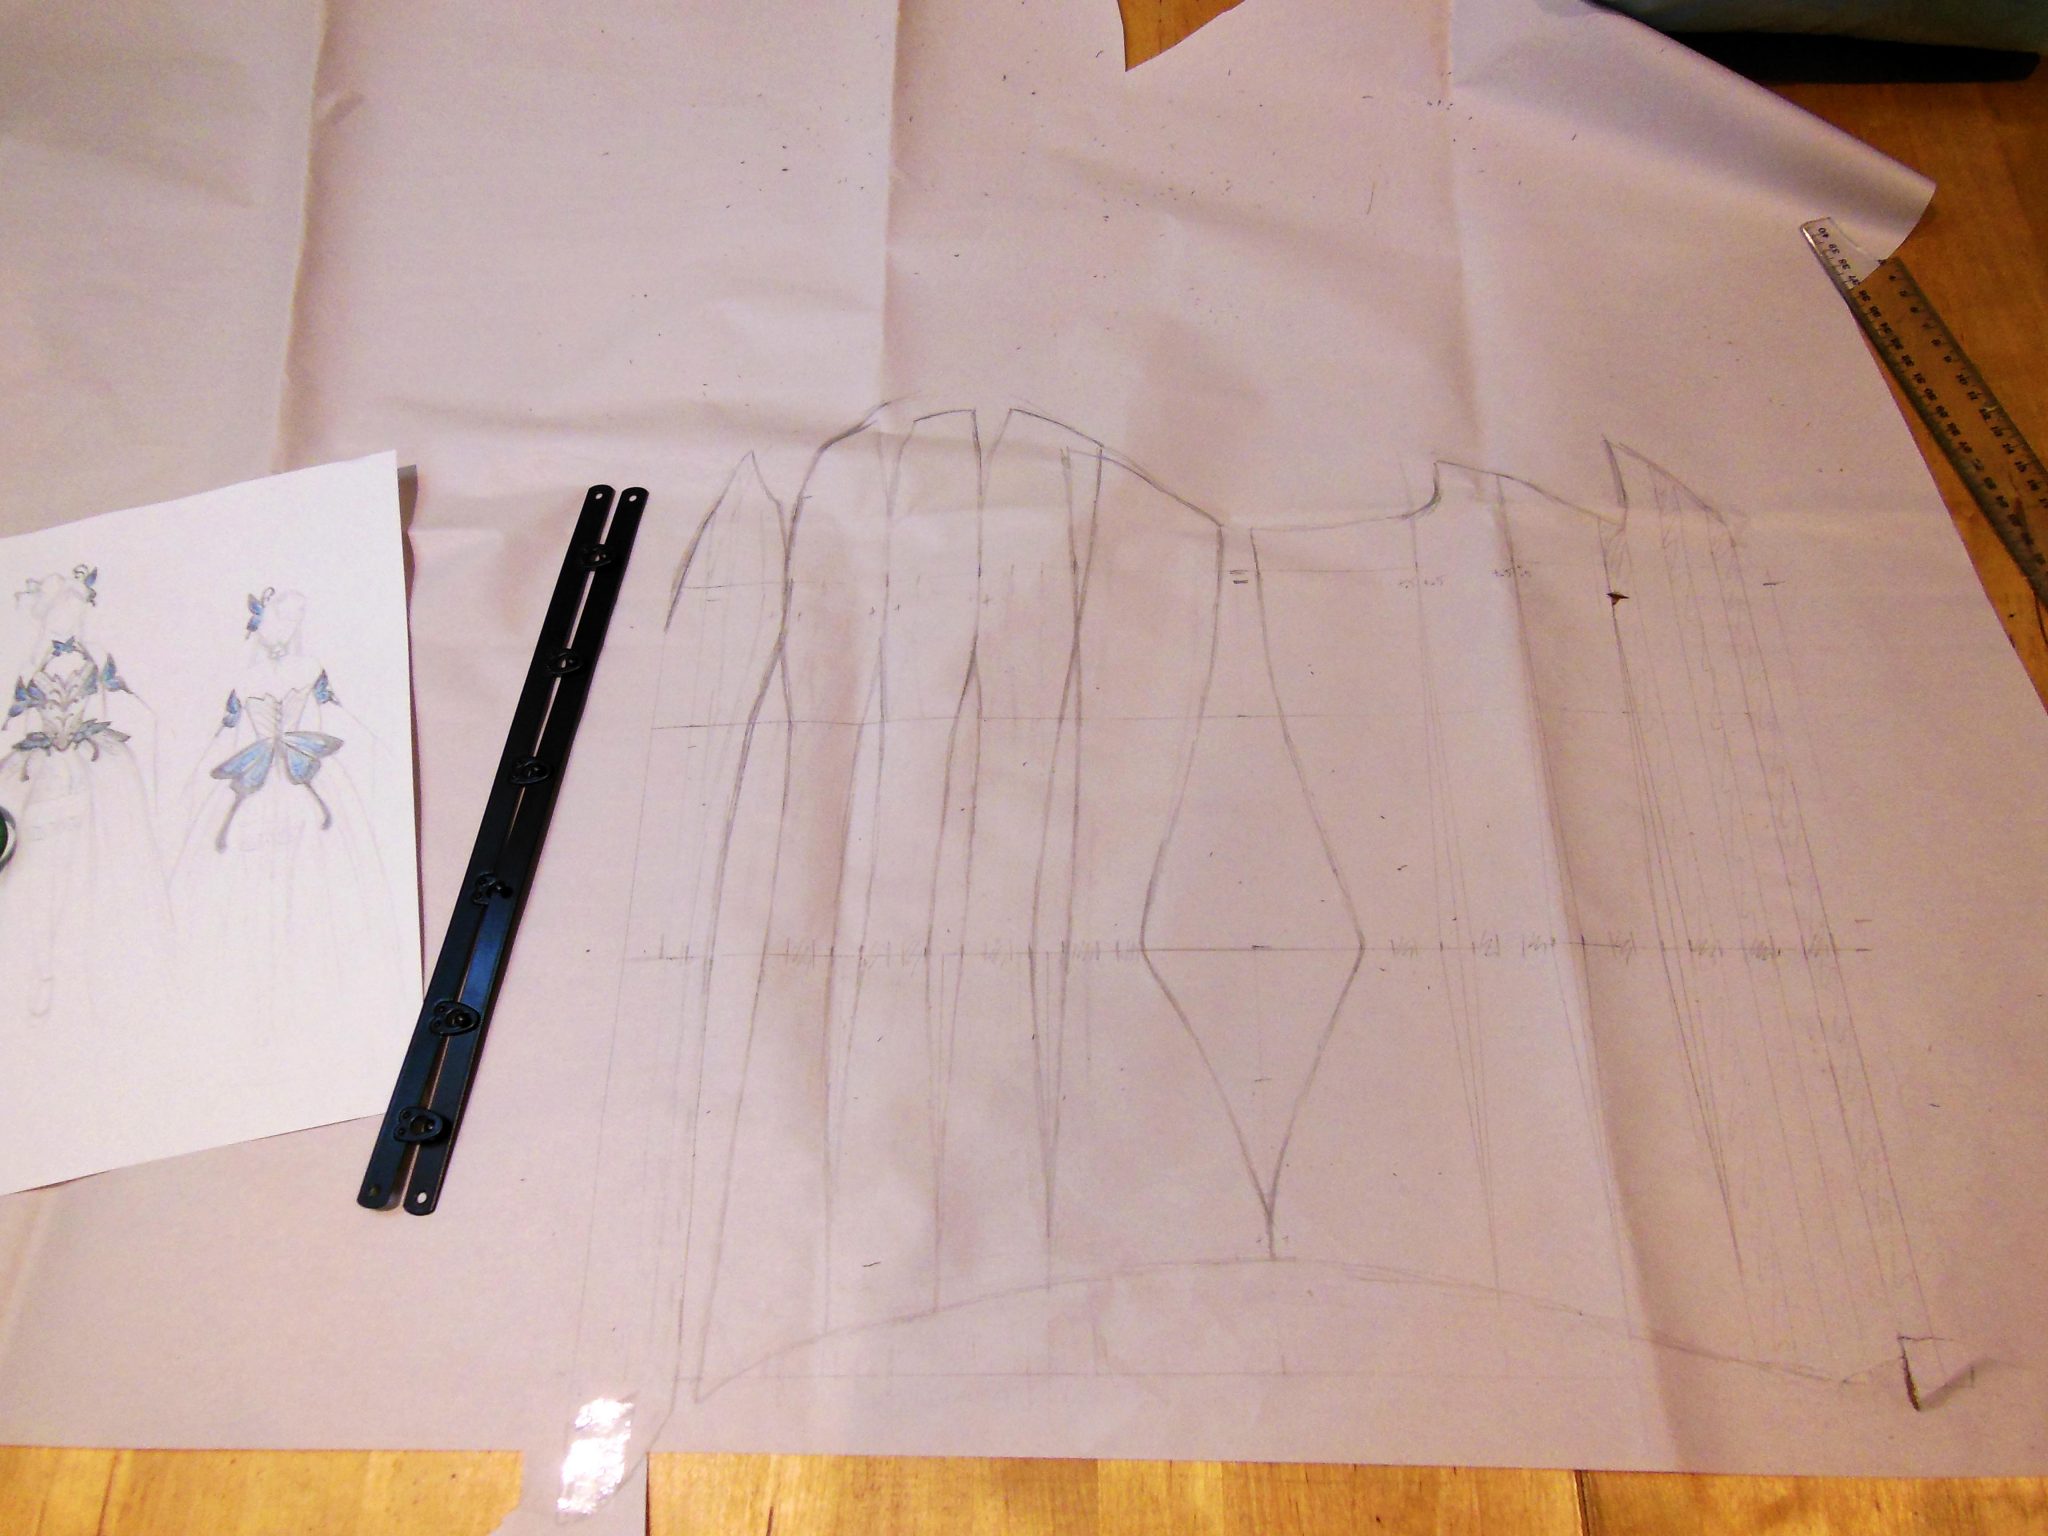 Drafting the pattern